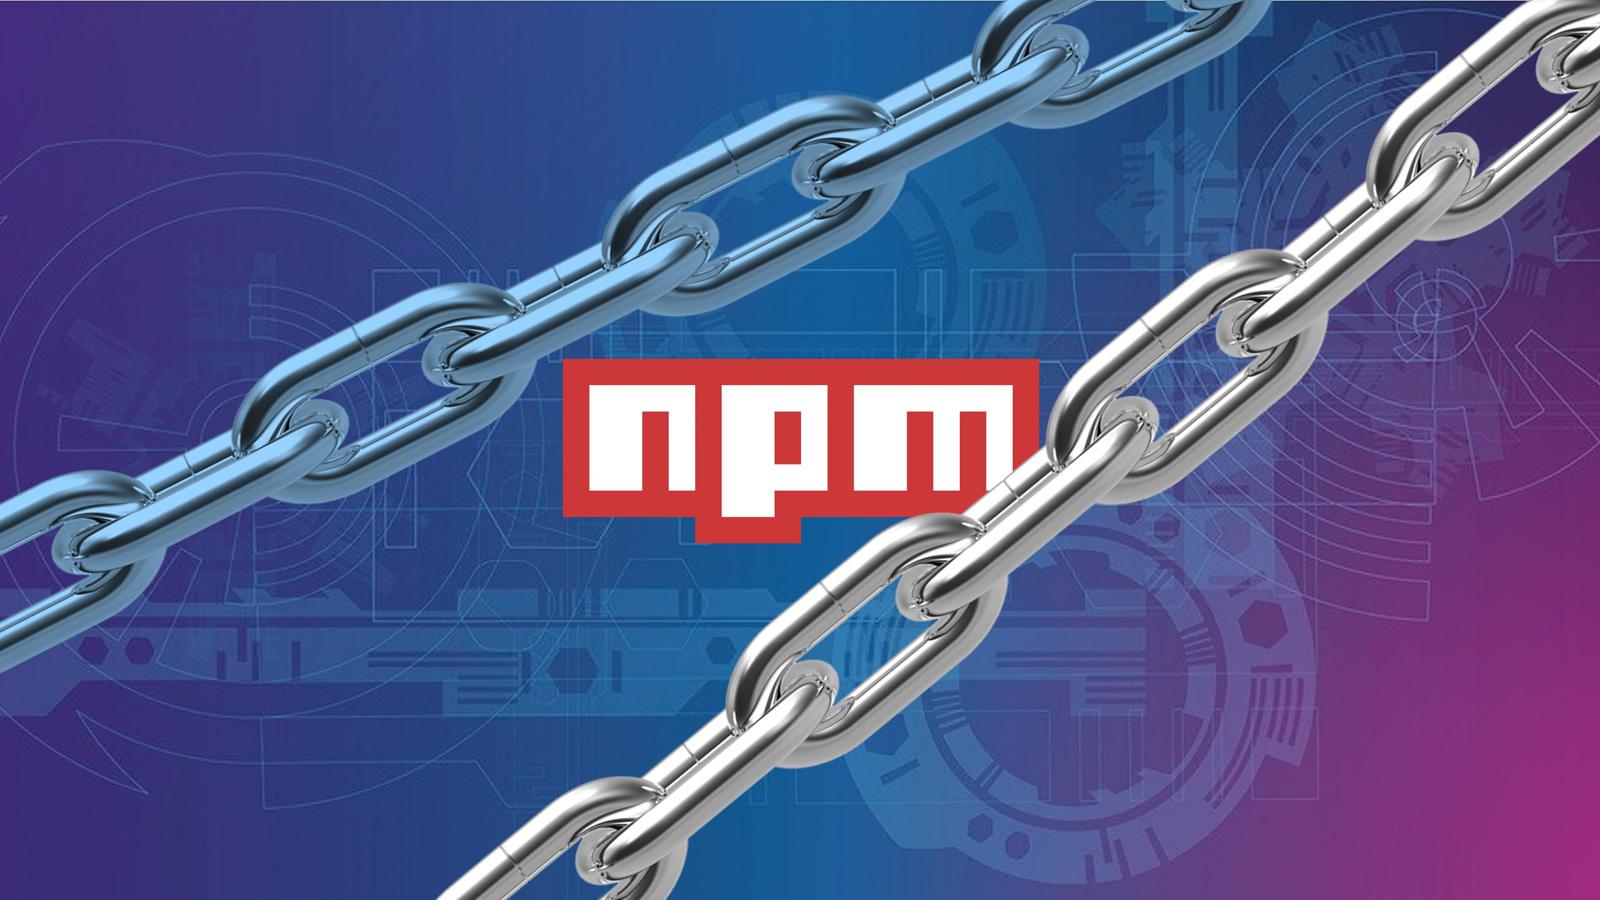 dev-corrupts-npm-libs-colors-and-faker-breaking-thousands-of-apps-vumetric-cyber-portal